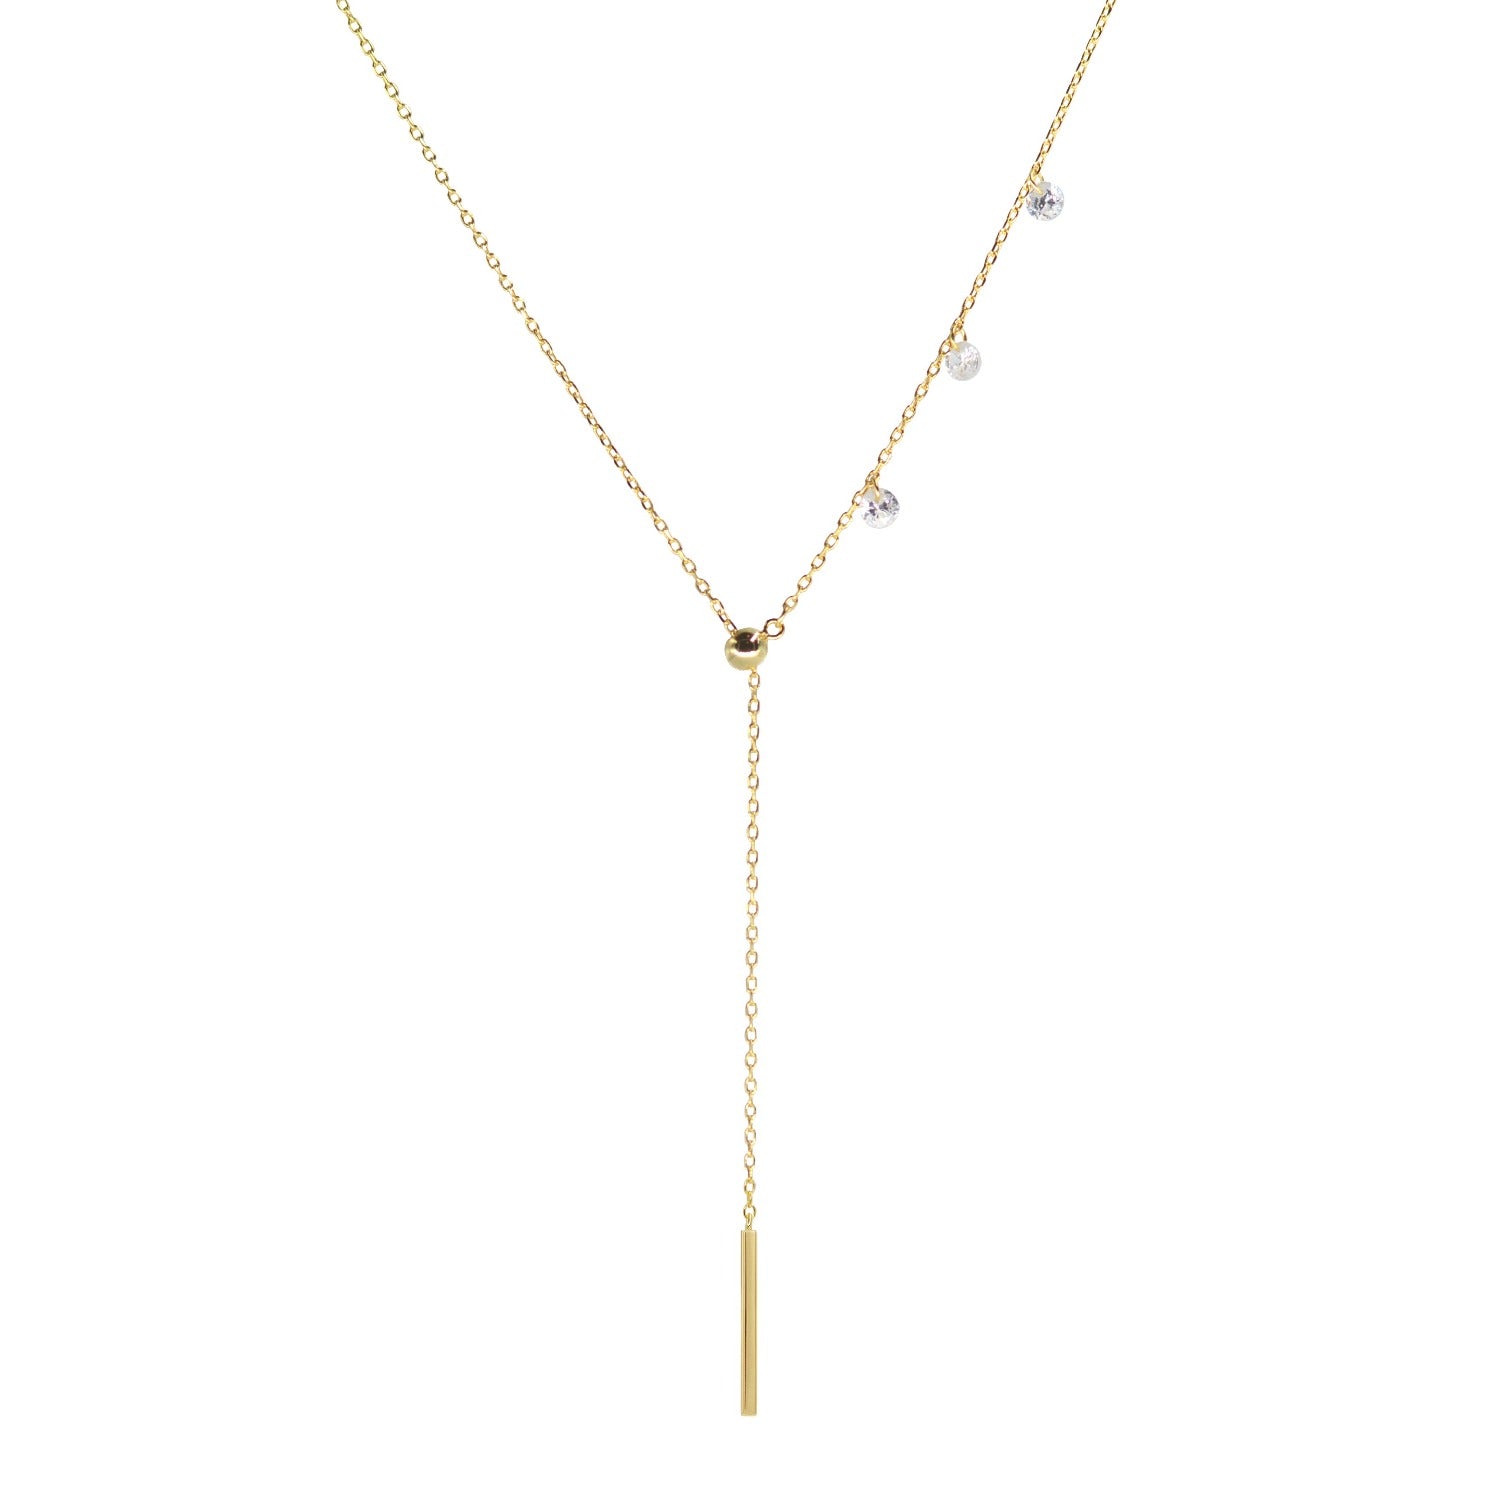 Double slider lariat necklace with mini bar in yellow gold